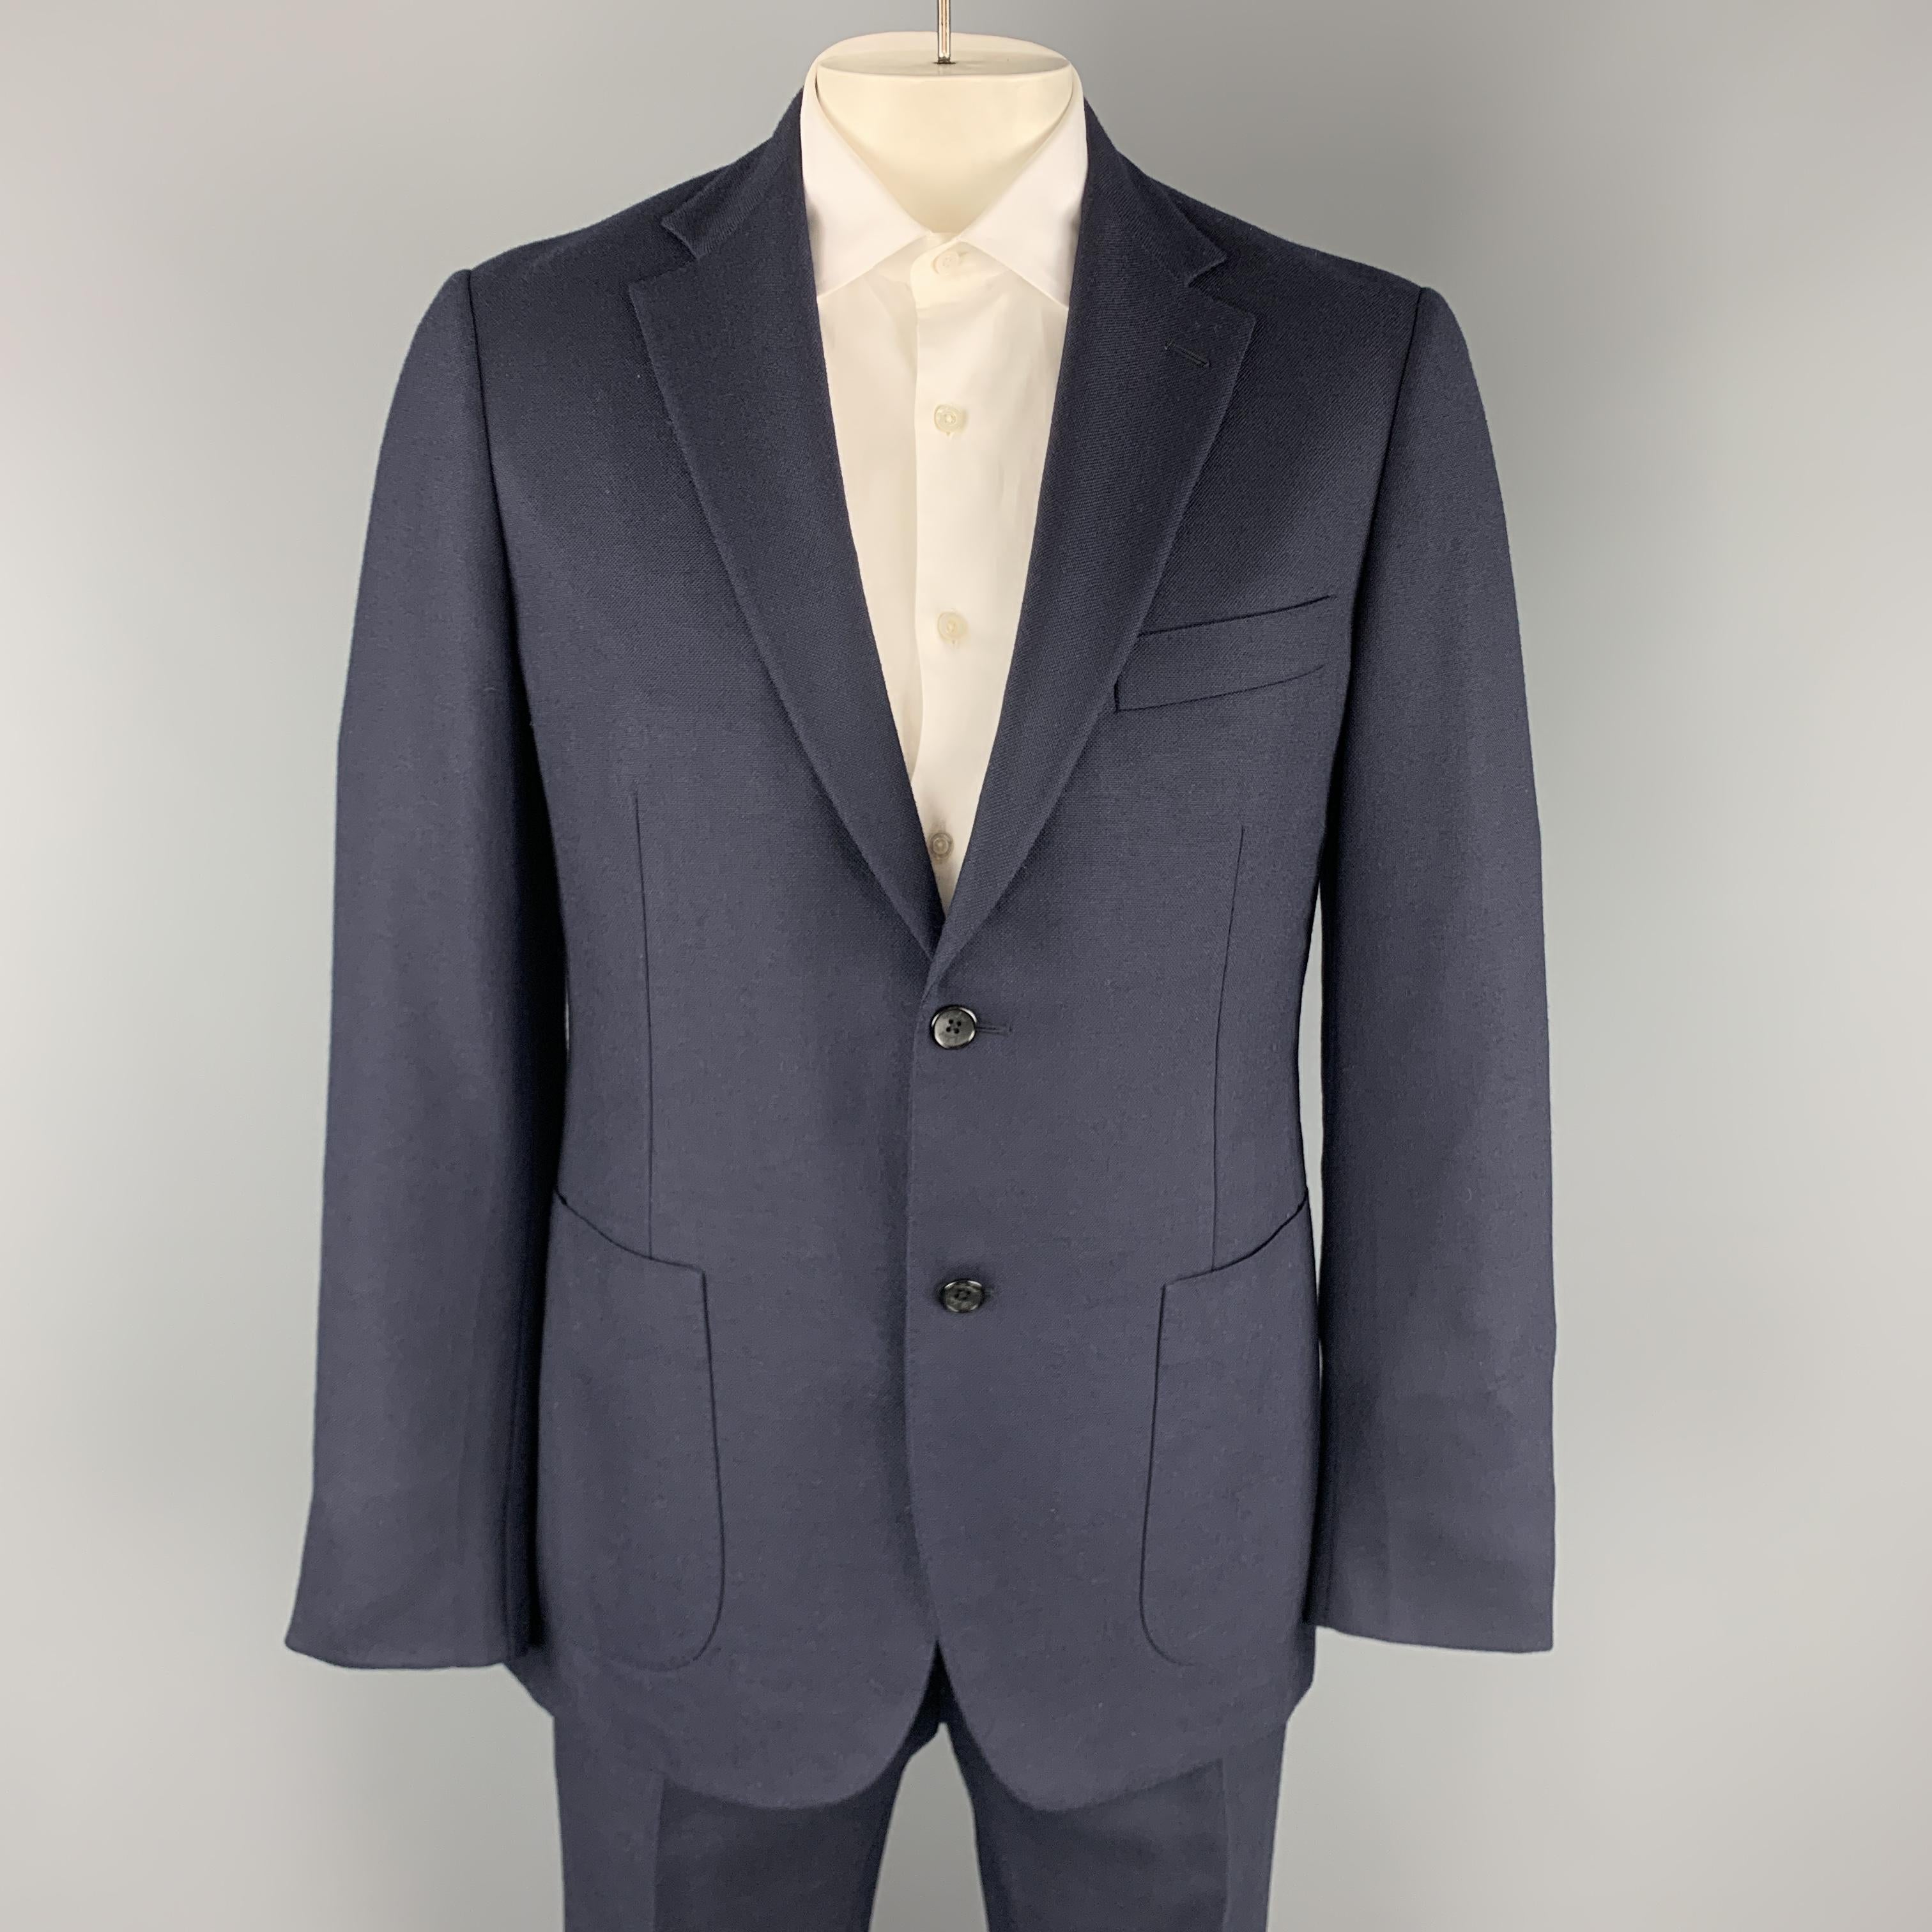 BELVEST suit comes in woven wool and includes a single breasted, two button sport coat with notch lapel and matching flat front trousers. Made in Italy.

Excellent Pre-Owned Condition.
Marked: IT 52

Measurements:

-Jacket
Shoulder: 18 in.
Chest: 45